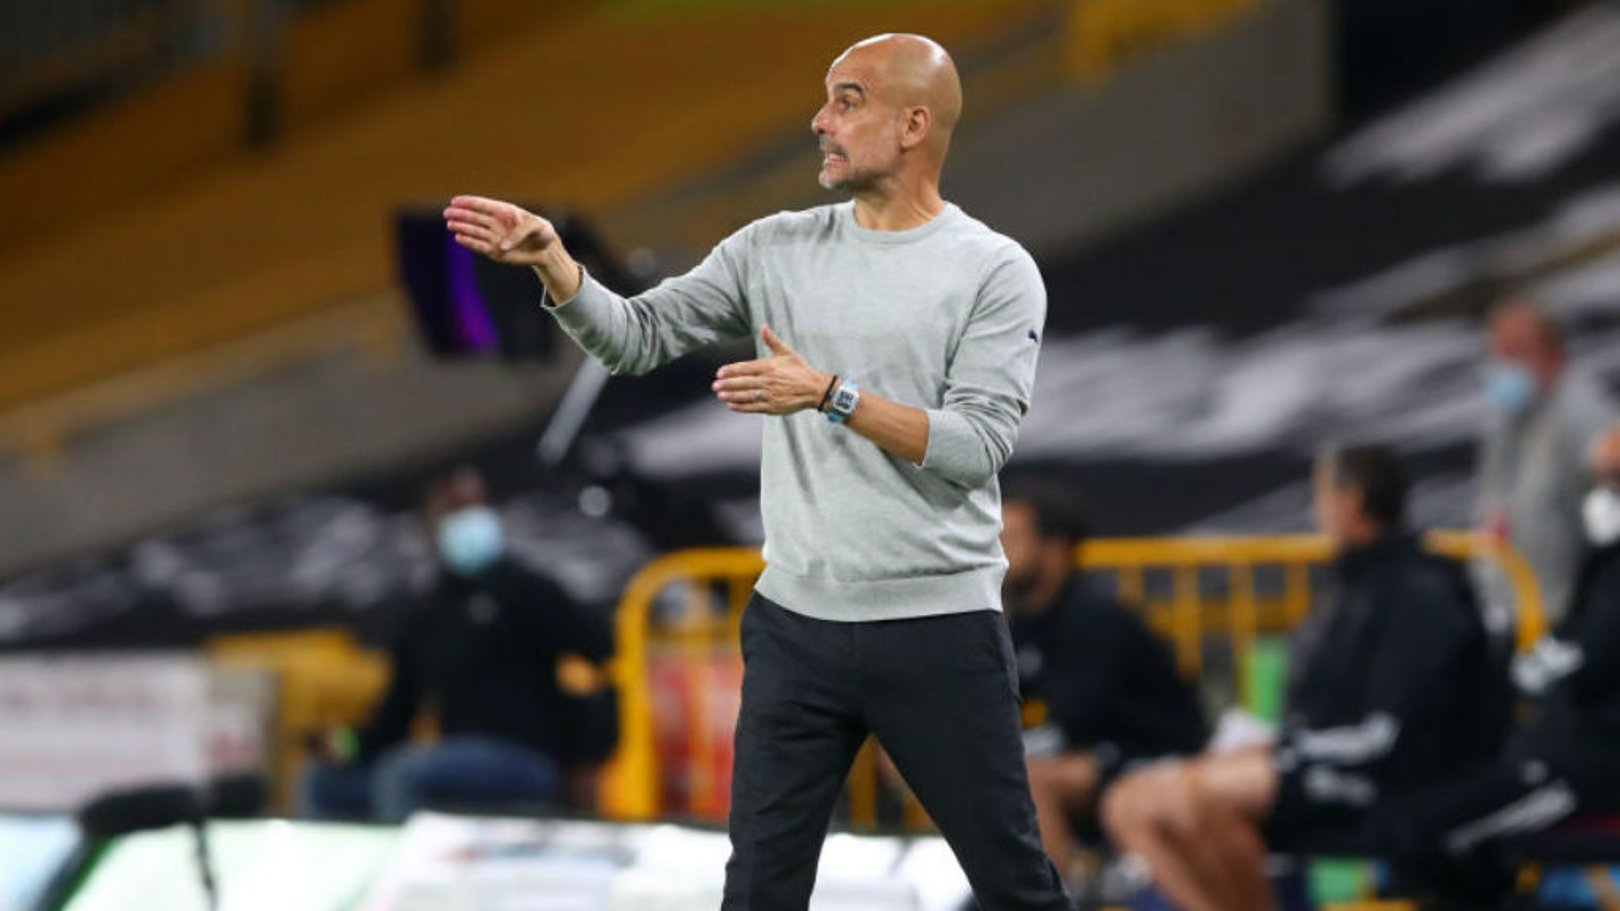 THE BOSS: Pep Guardiola gets his point across to the City players